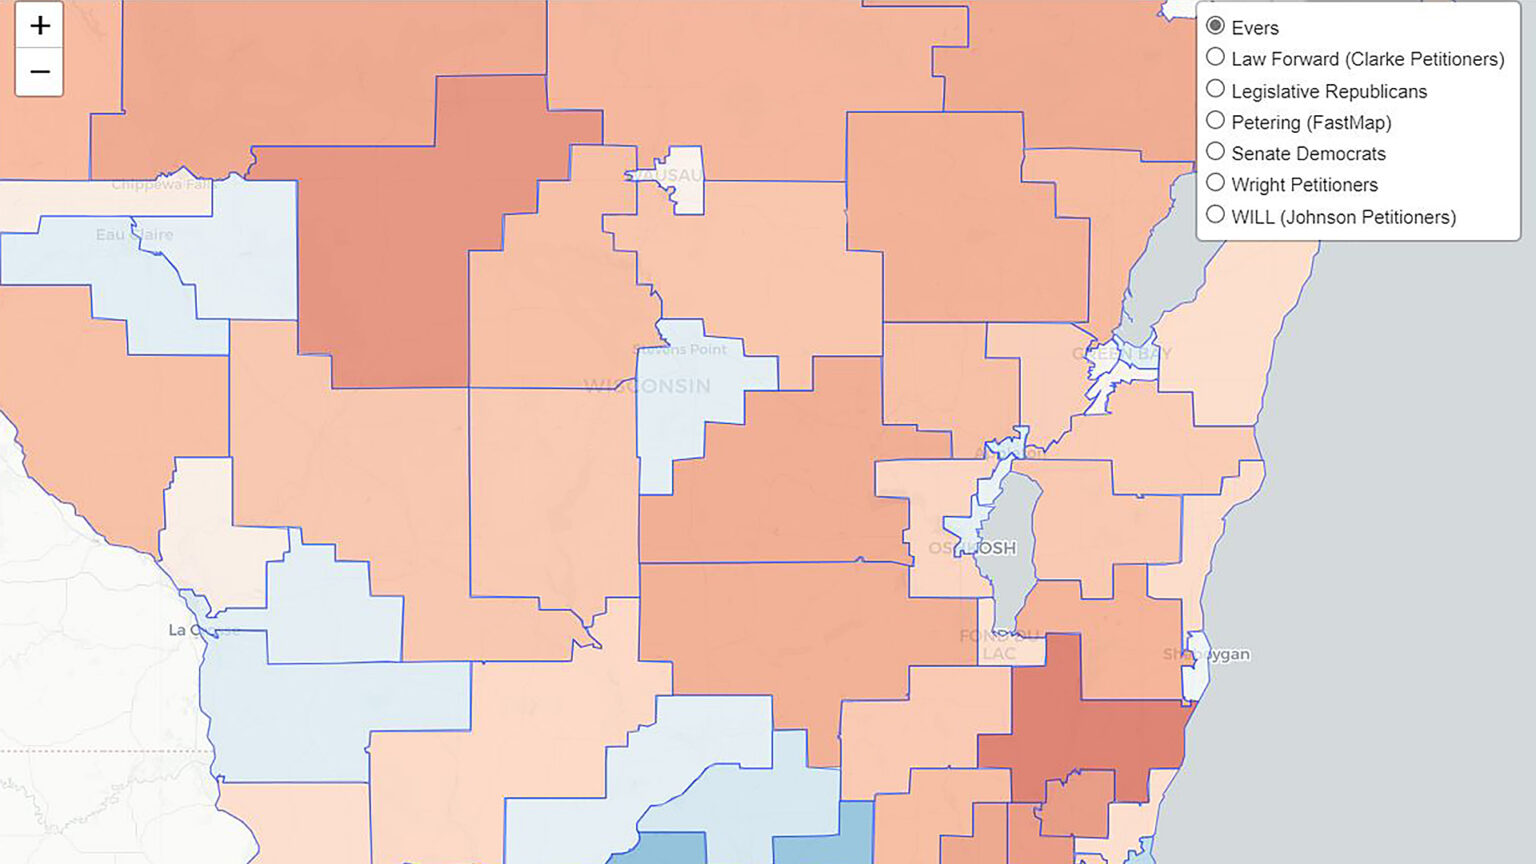 A map shows outlines of legislative districts in different shades of blue and red, with + and - zoom buttons at the upper left a key at the upper right showing options titled Evers, Law Forward (Clarke Petitioners), Legislative Republicans, Petering (FastMap), Senate Democrats, Wright Petitioners and WILL (Johnson Petitioners), with the first option selected.